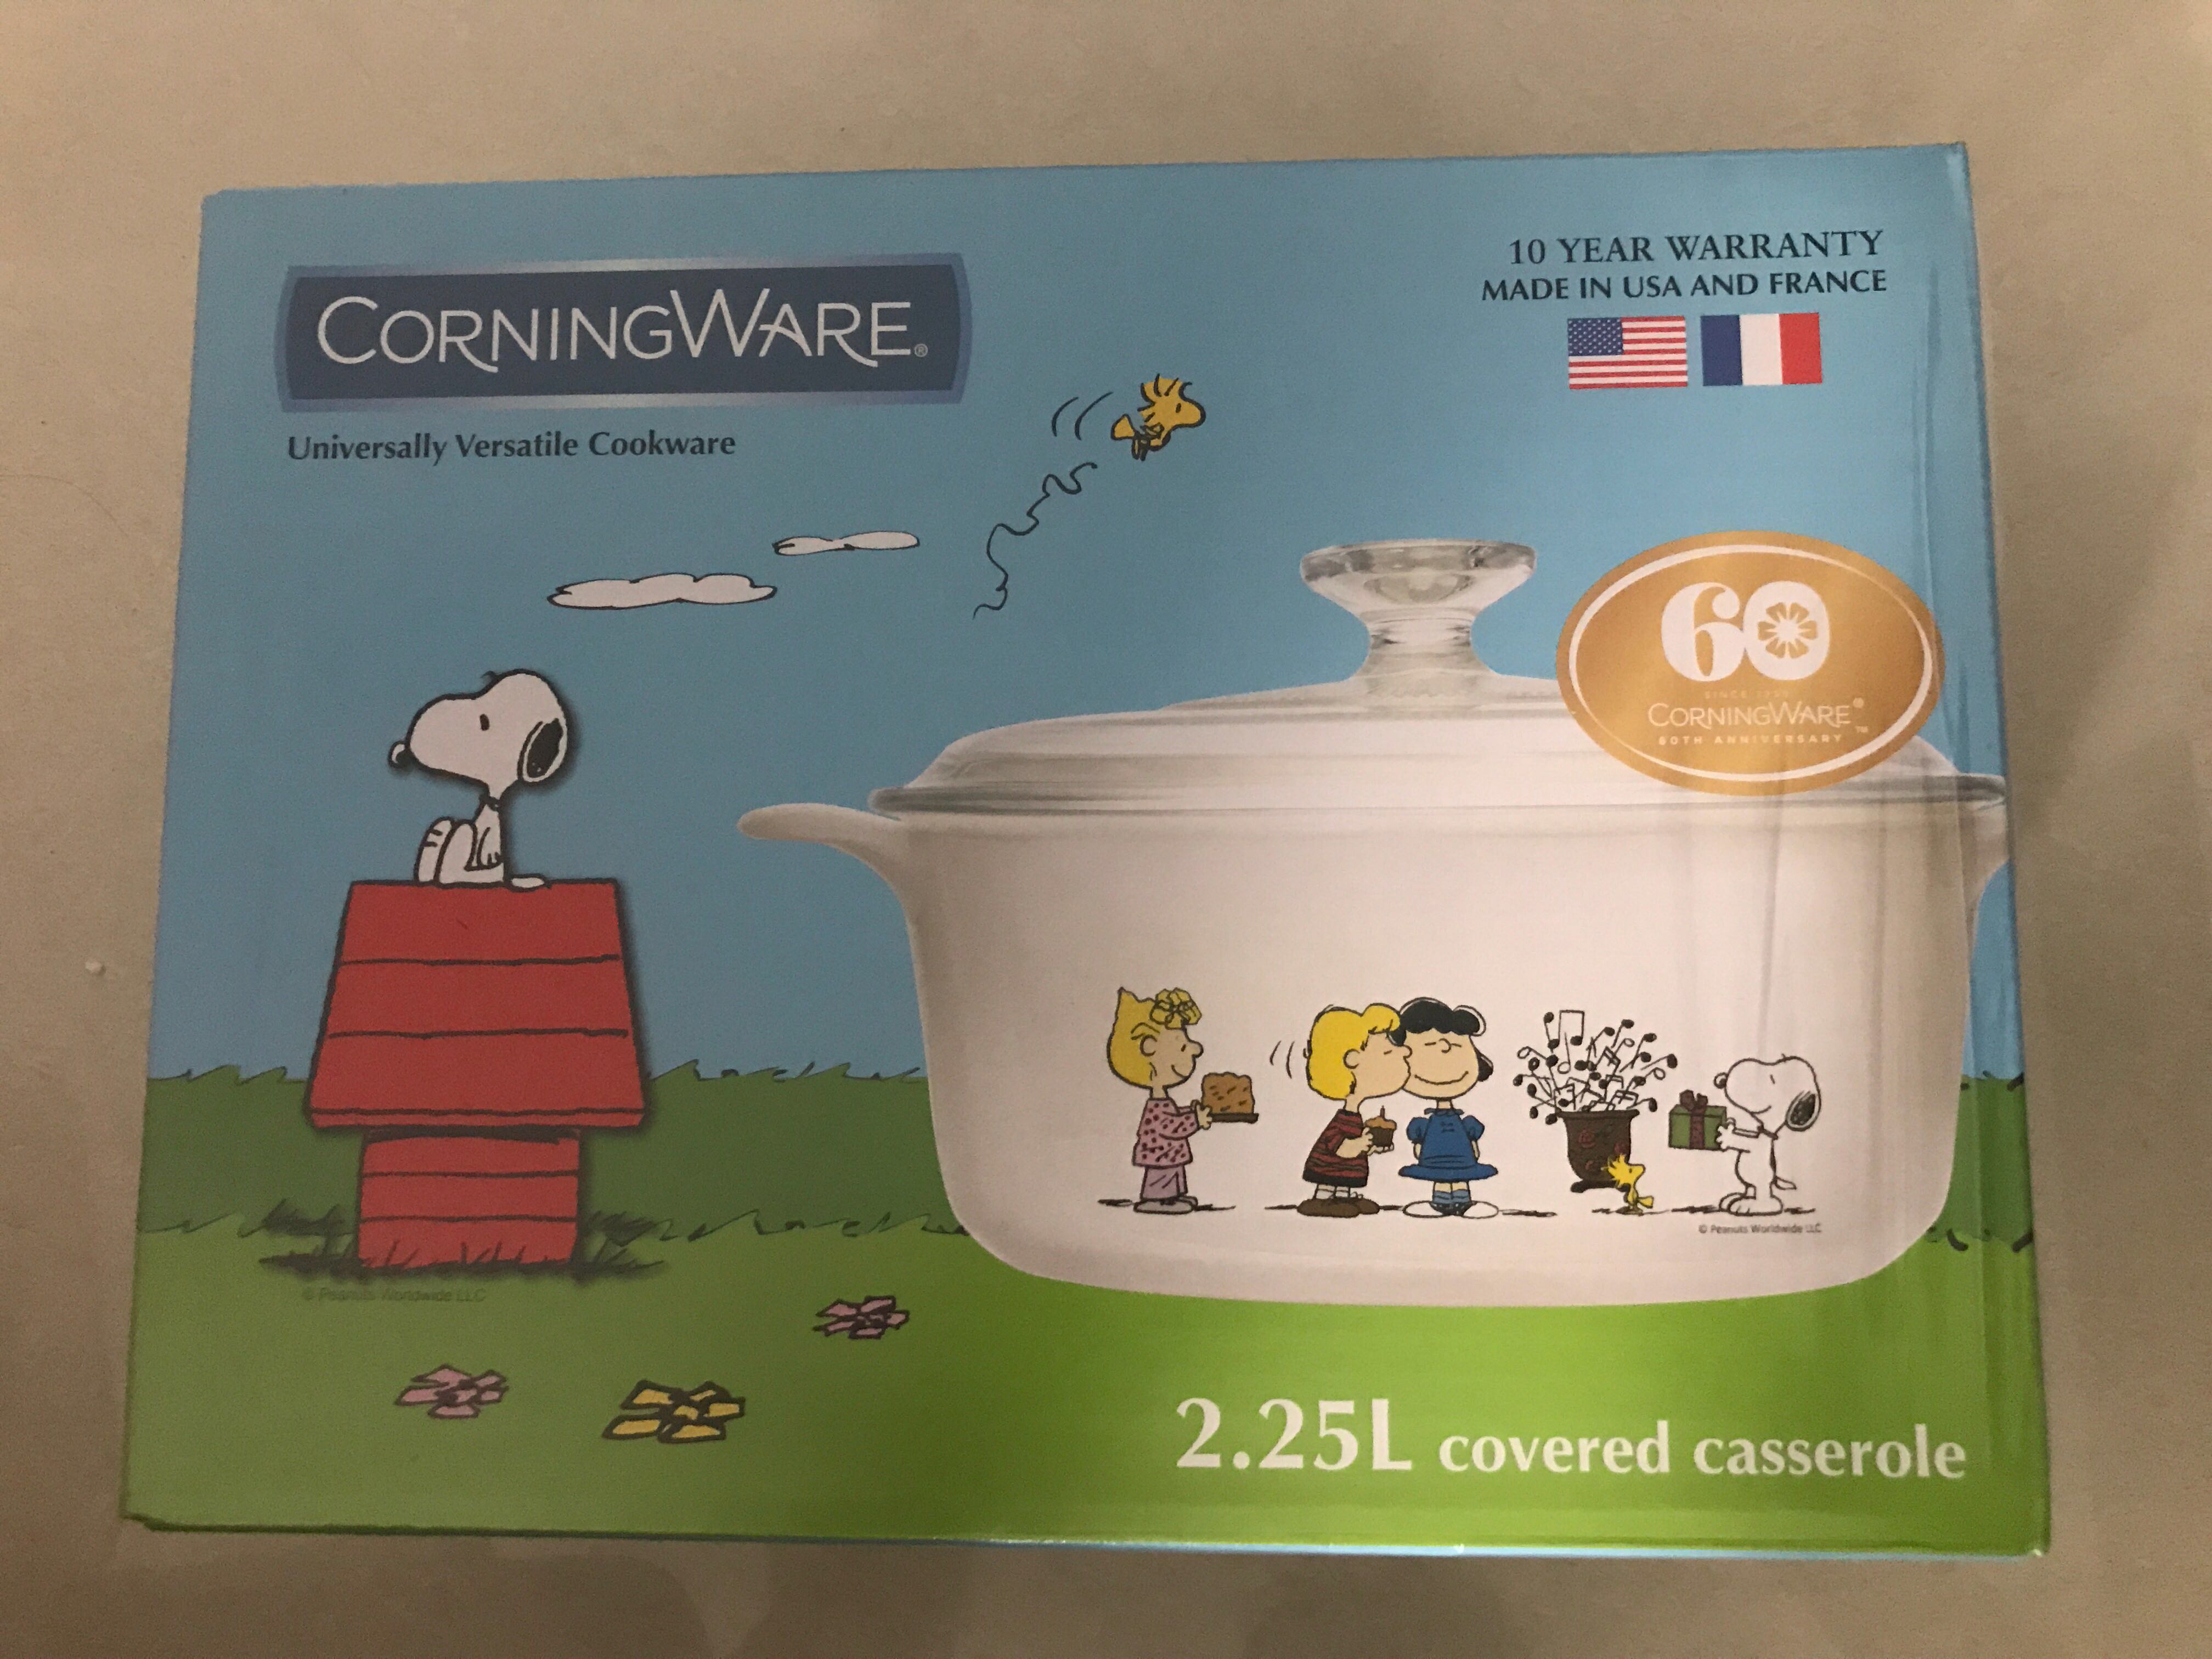 Limited Edition Corningware Peanuts Snoopy Covered Casserole Snoopy Cookware